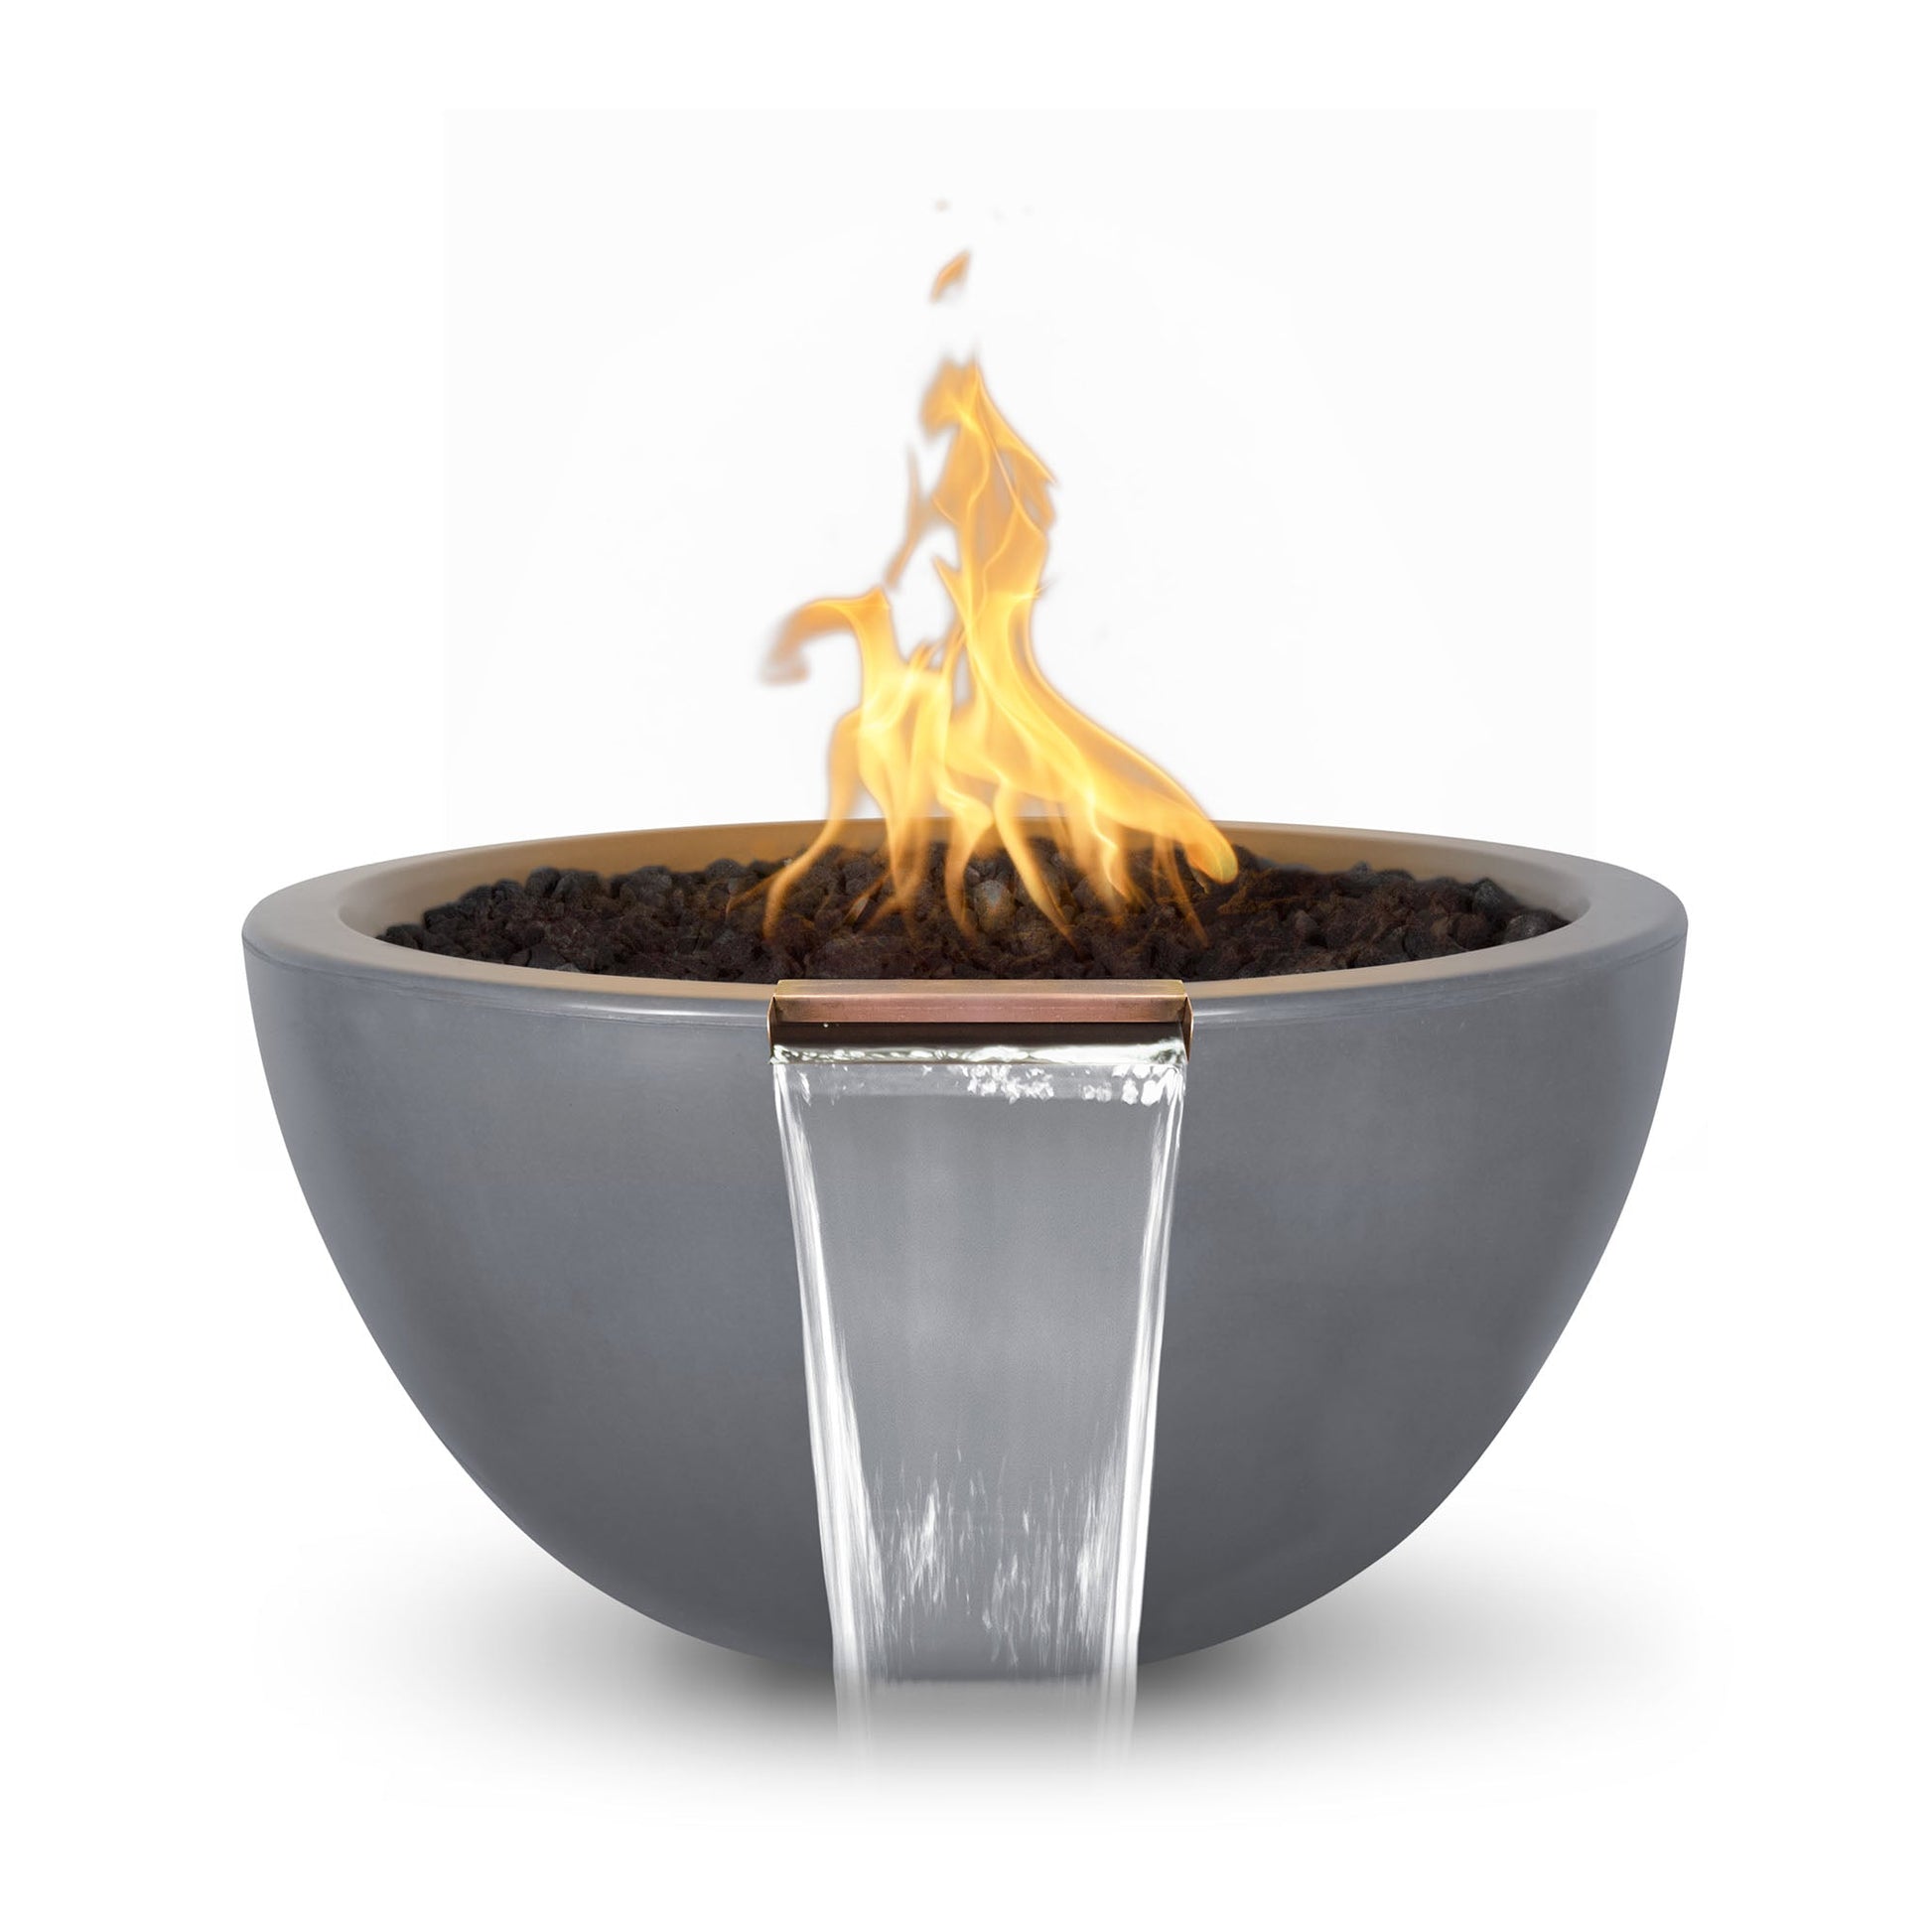 The Outdoor Plus Round Luna 38" Chestnut GFRC Concrete Liquid Propane Fire & Water Bowl with Match Lit with Flame Sense Ignition